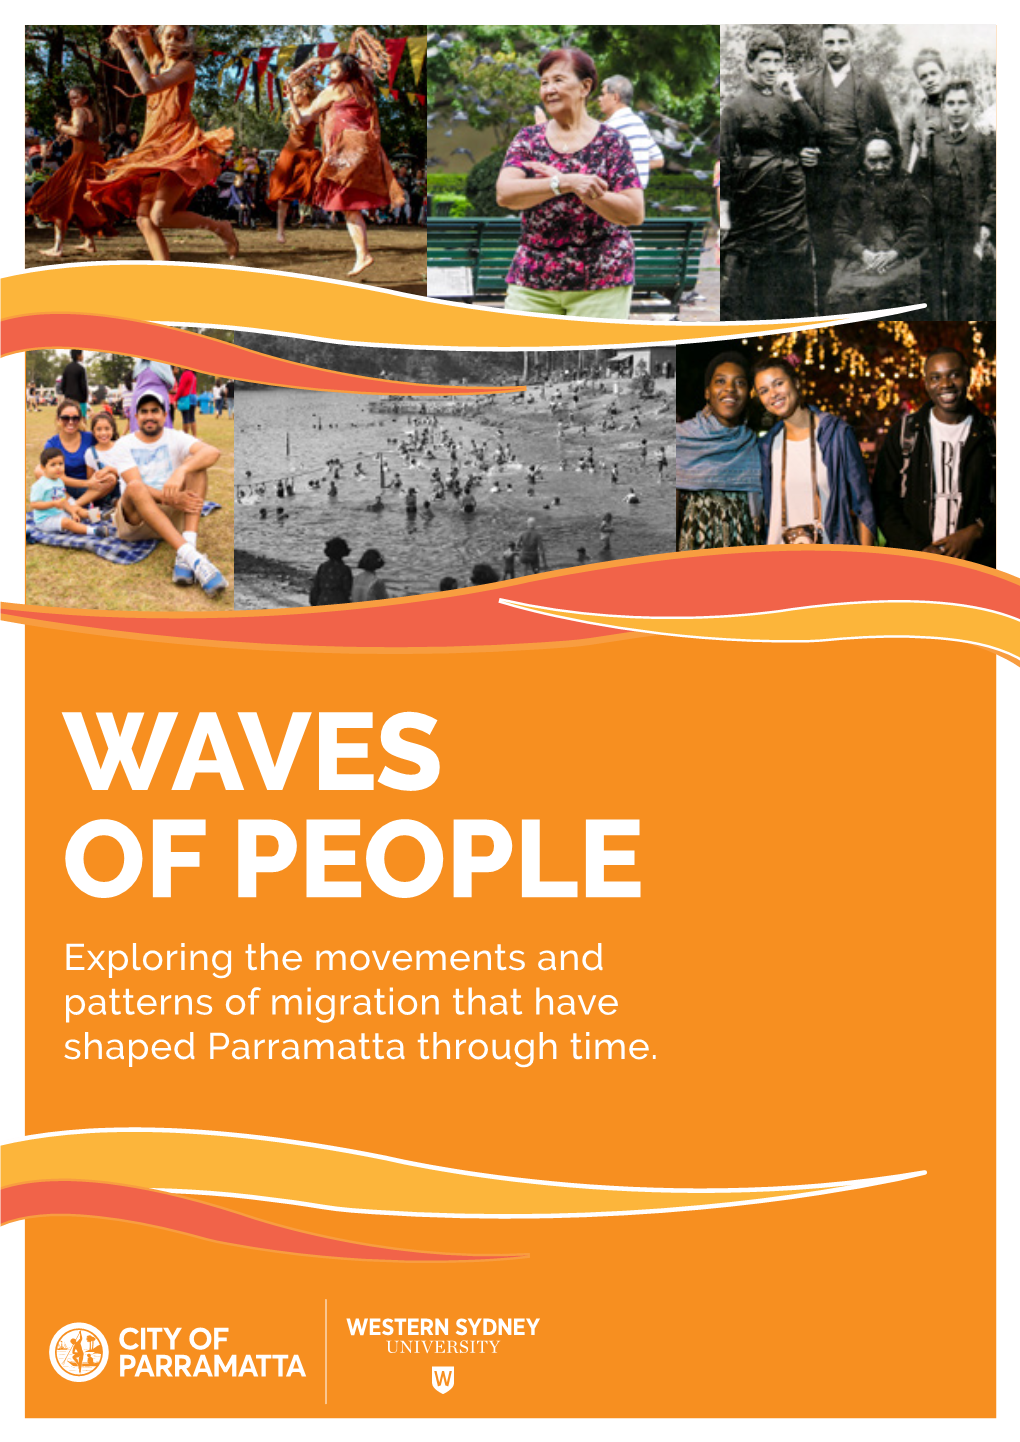 WAVES of PEOPLE Exploring the Movements and Patterns of Migration That Have Shaped Parramatta Through Time